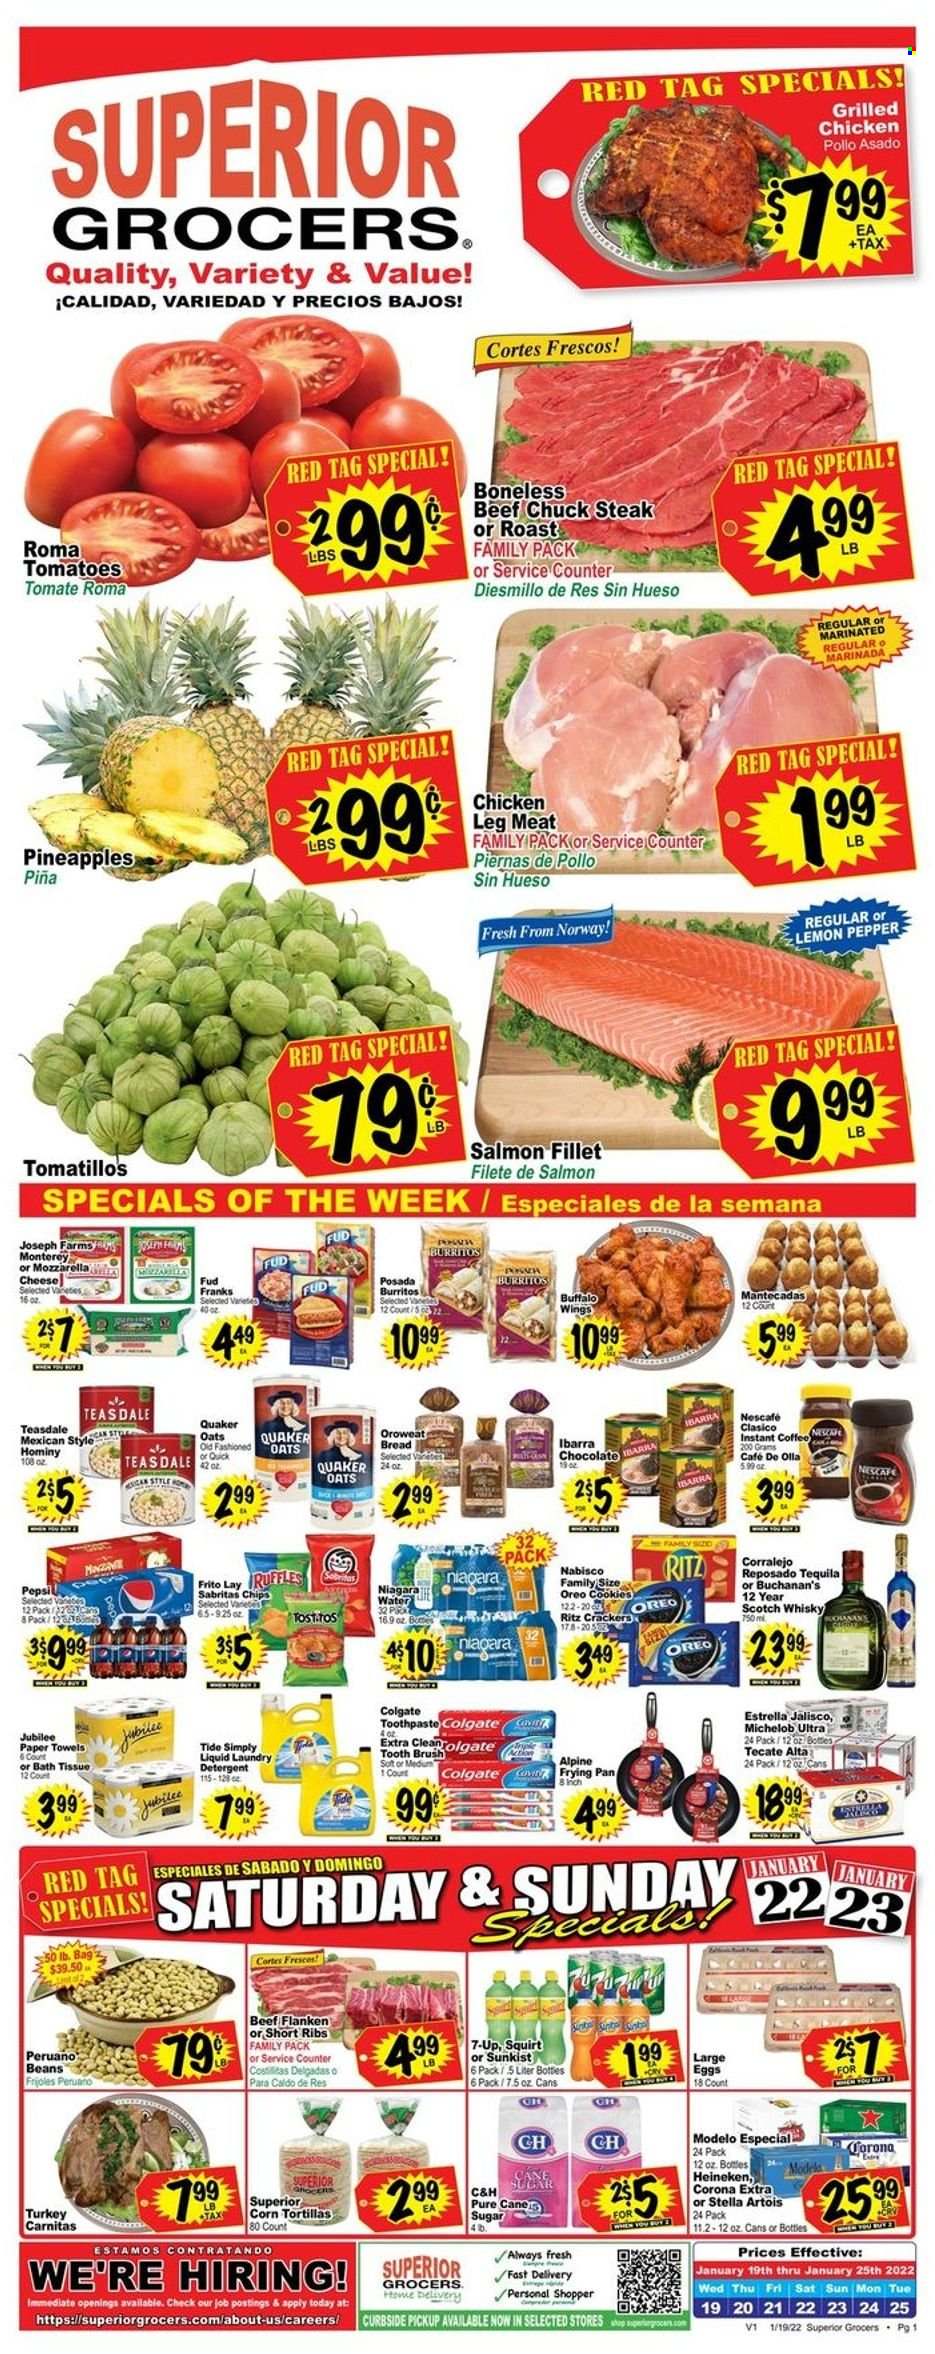 thumbnail - Superior Grocers Flyer - 01/19/2022 - 01/25/2022 - Sales products - bread, corn tortillas, tortillas, tomatillo, tomatoes, pineapple, chicken legs, beef meat, steak, chuck steak, salmon, salmon fillet, burrito, Quaker, cheese, Oreo, large eggs, cookies, chocolate, crackers, RITZ, sugar, oats, Pepsi, 7UP, coffee, Nescafé, tequila, scotch whisky, whisky, beer, Corona Extra, Heineken, Modelo, Tide, laundry detergent, Colgate, toothpaste, pan, bag, Stella Artois, Michelob. Page 1.